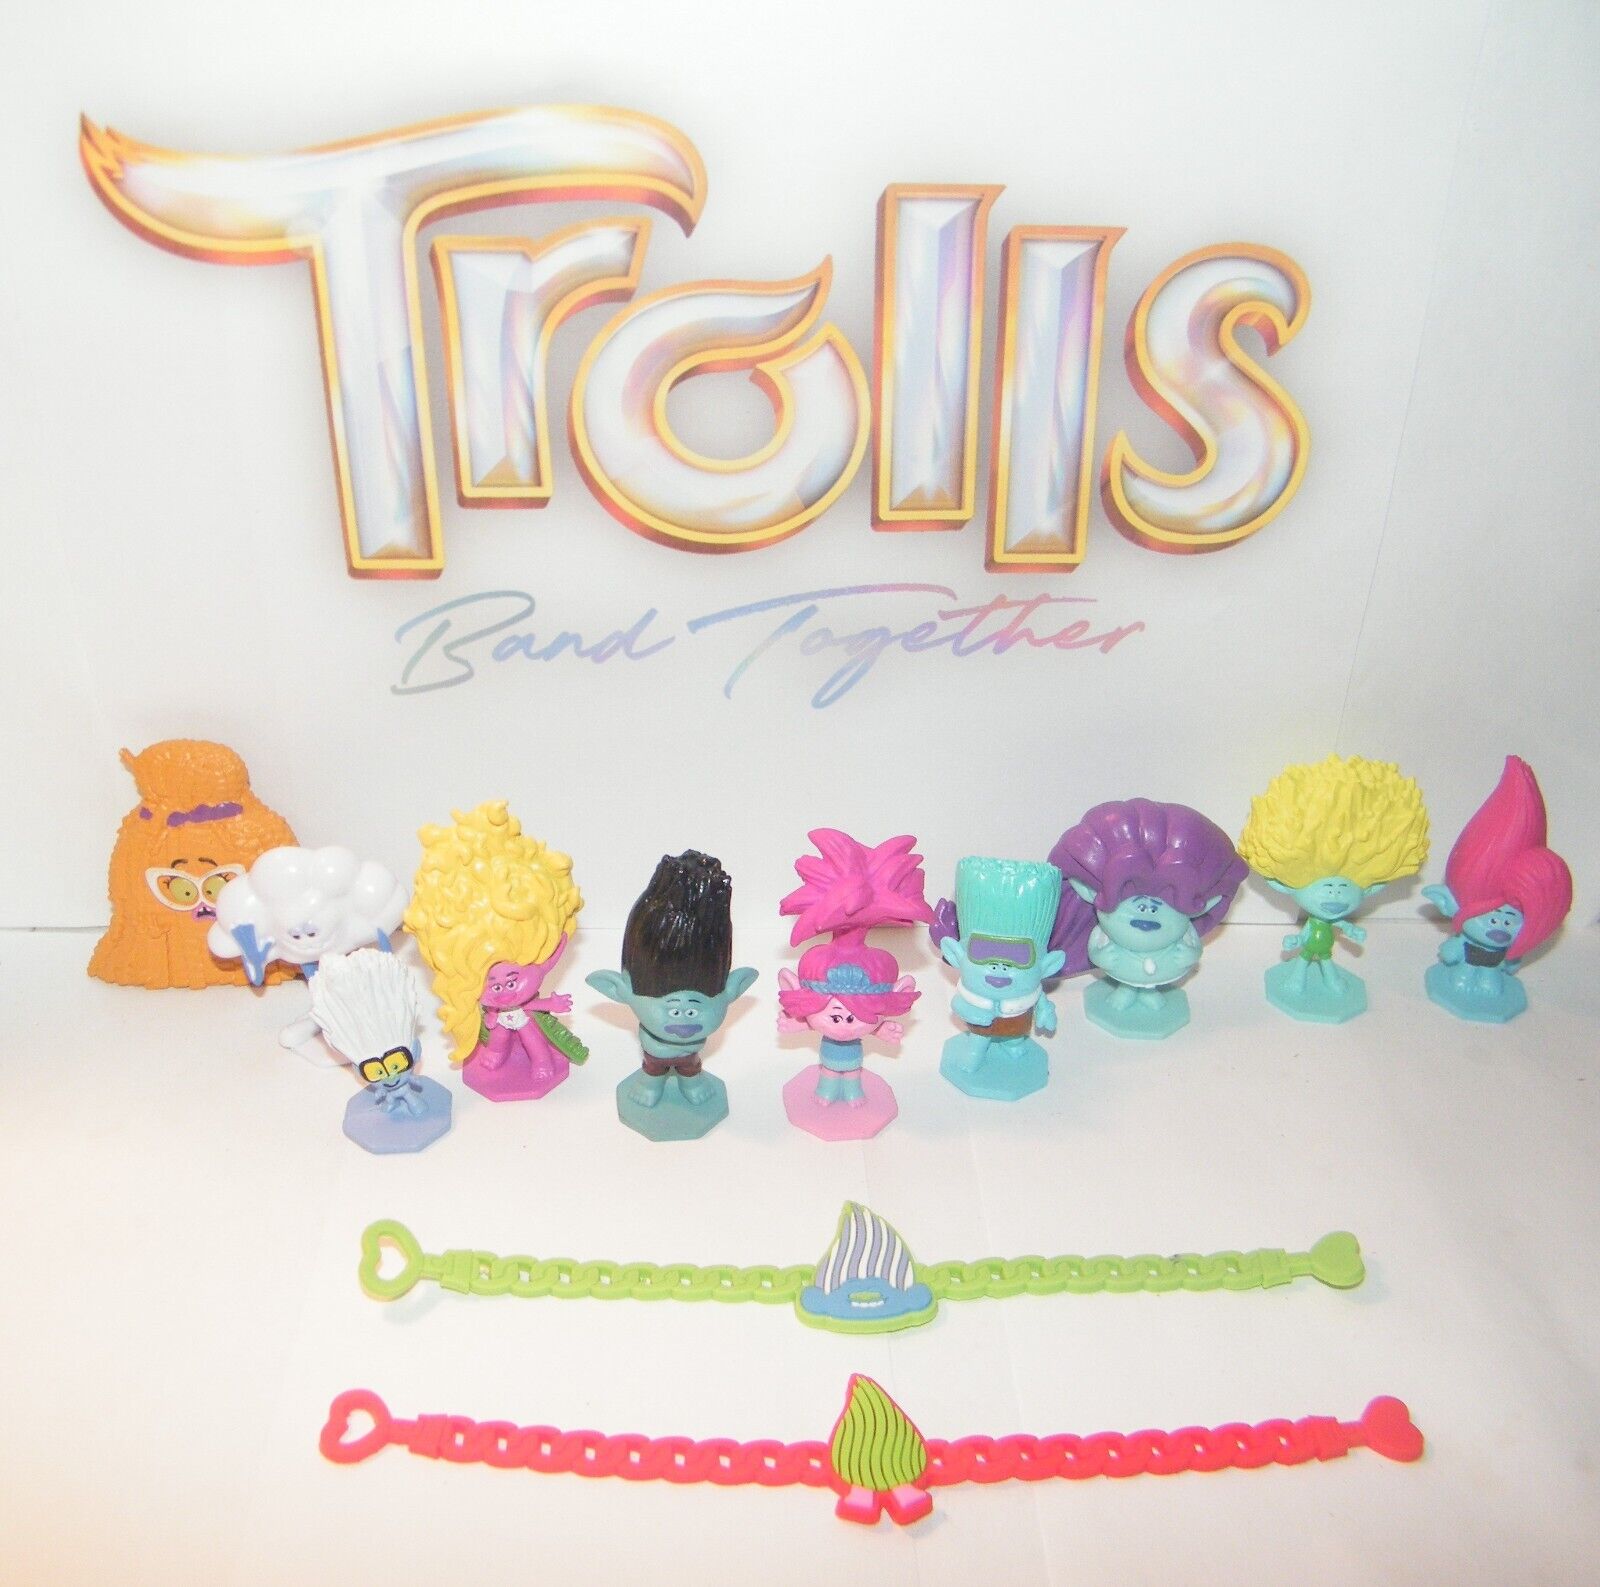 Trolls Band Together Movie Deluxe Party Favors Goody Bag Fillers Set of 12